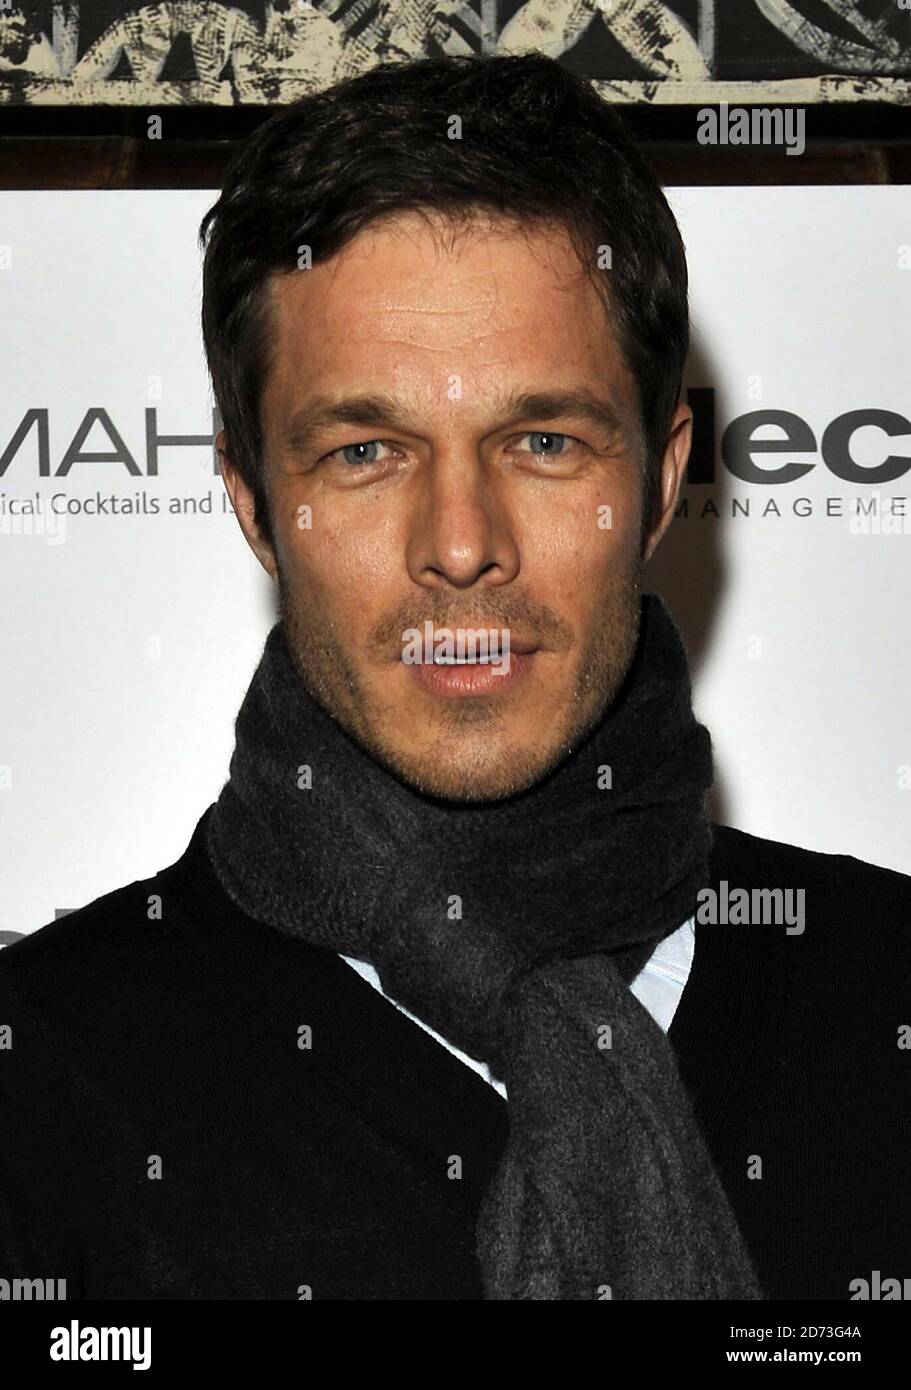 Paul Sculfor attending the Select Models Oscars Party at Mahiki in central London. Stock Photo